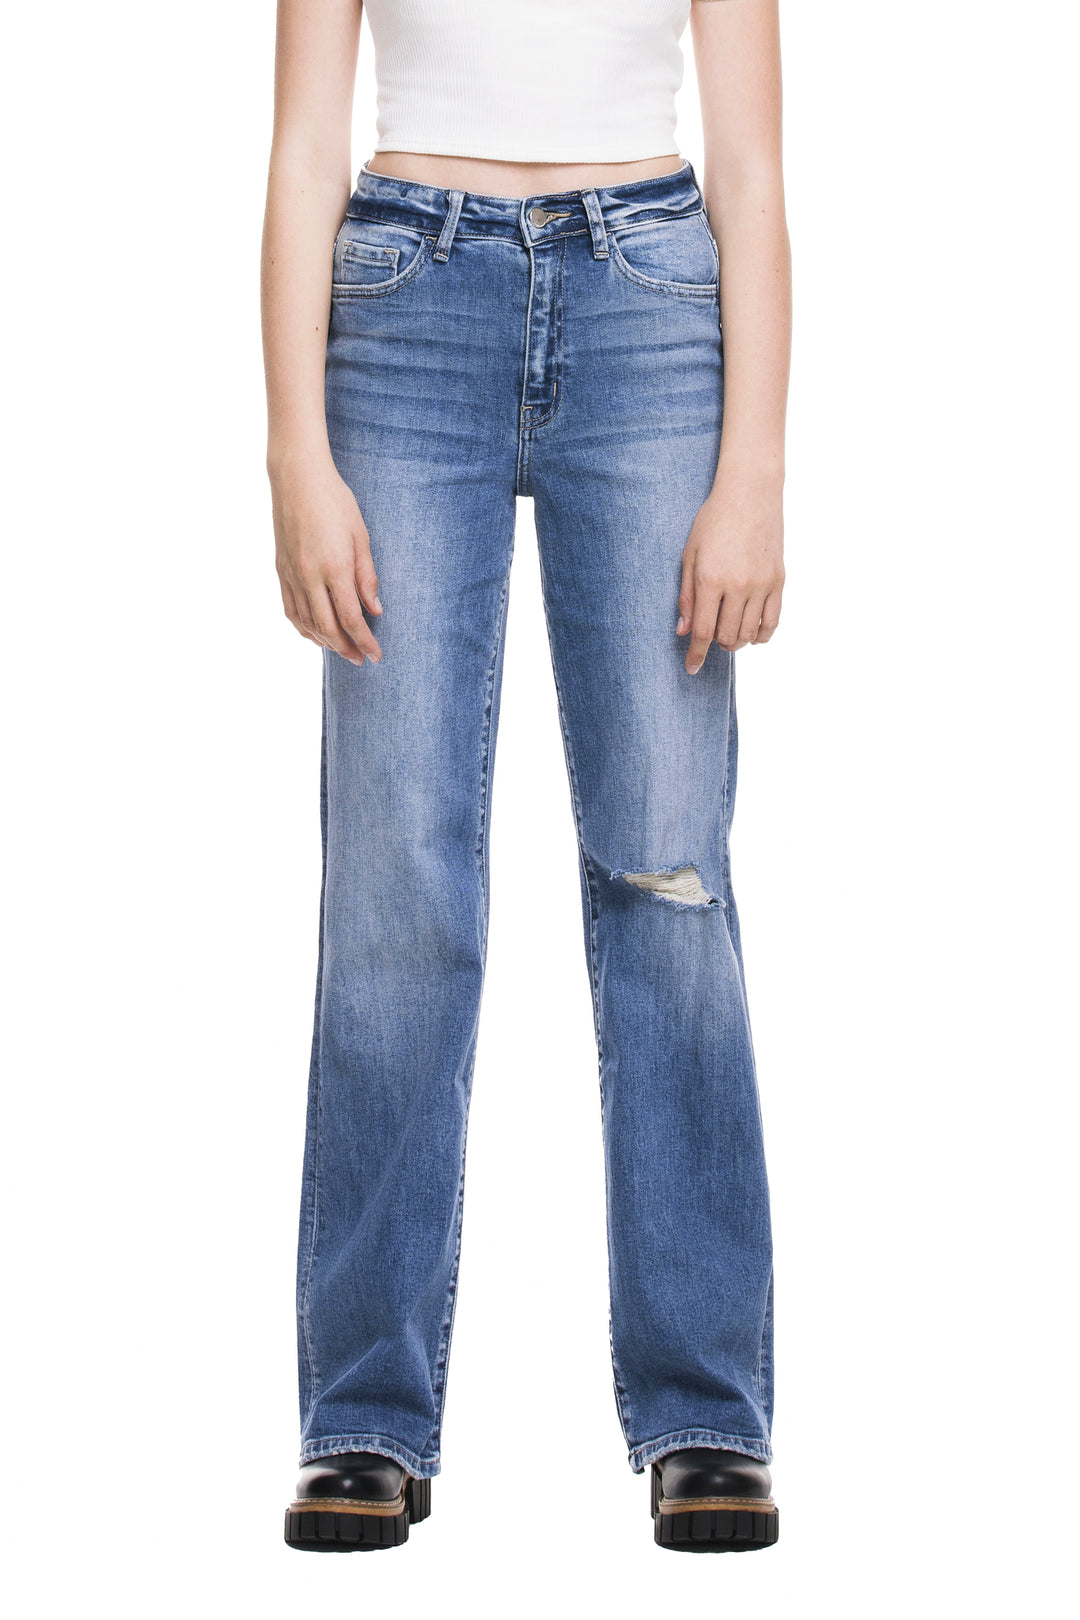 Young Folks 90's Vintage Flare Jeans - Expressive Collective CO.